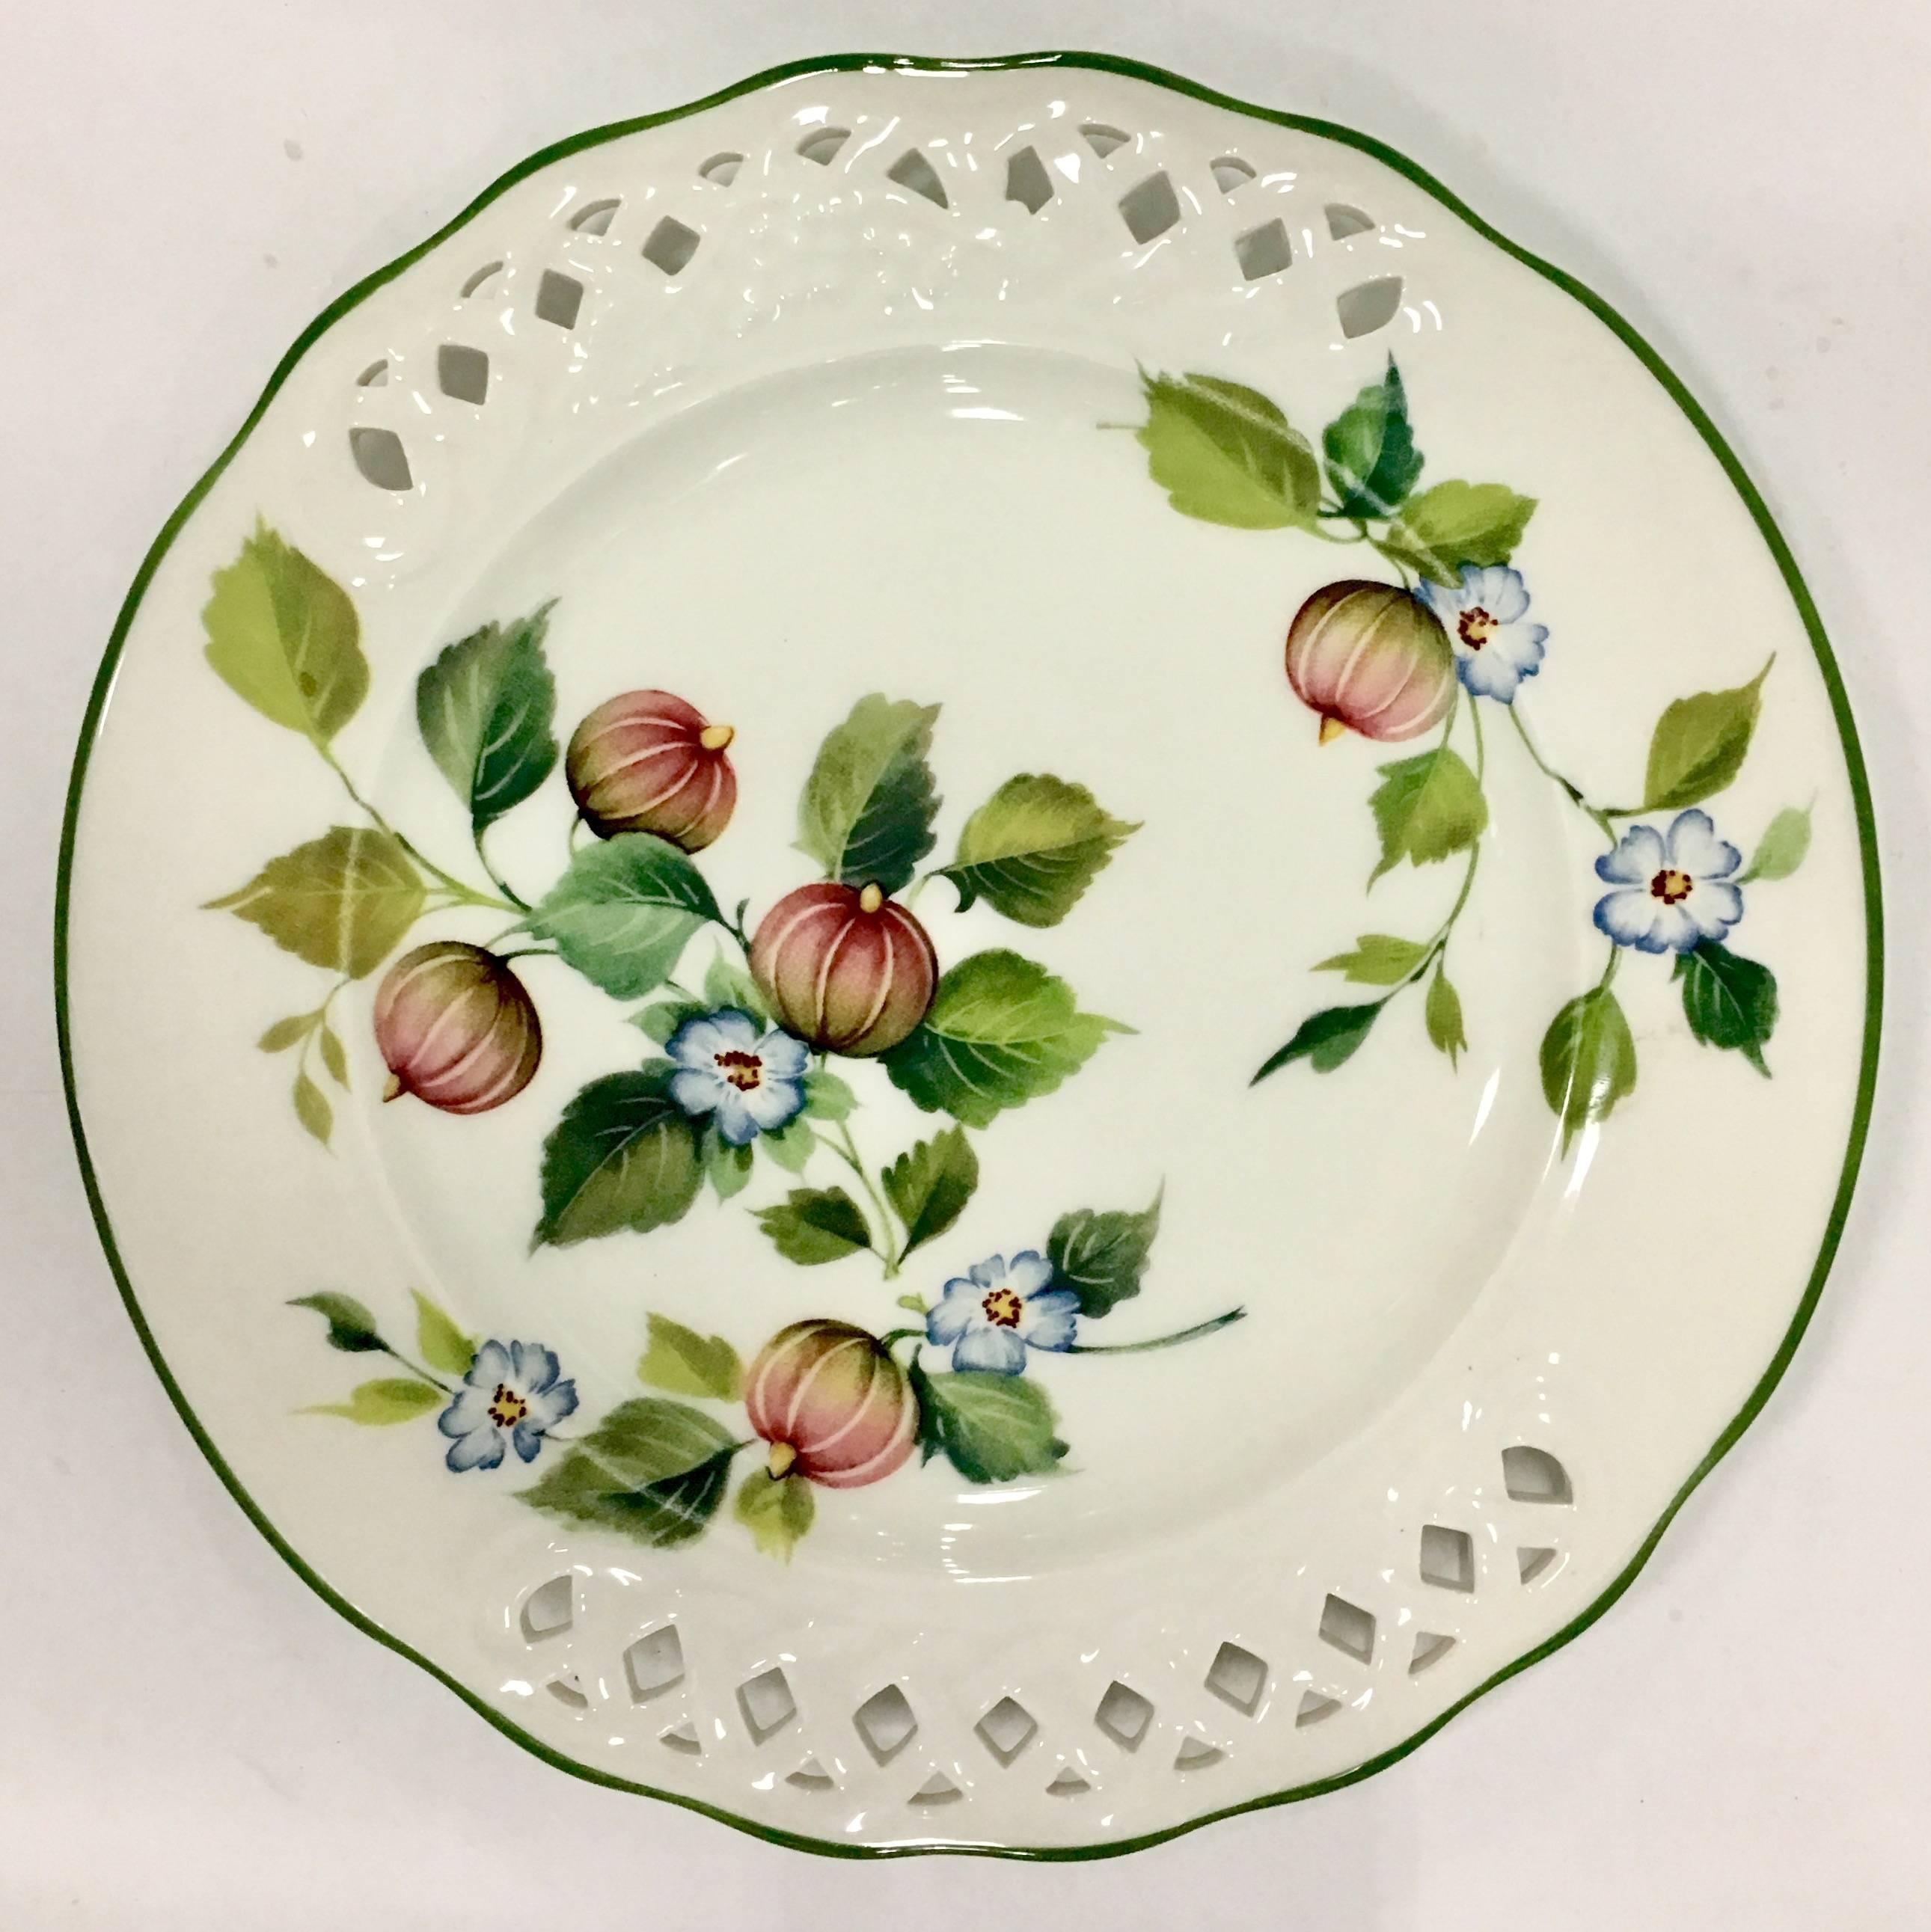 Vintage set of twelve pieces ceramic pierced edge dinnerware set in the "Tiffany" pattern by, Brunelli. Set includes, seven salad/dessert plates, four dinner plates and one round chop platter. Signed on the underside, Designed by Brunelli,